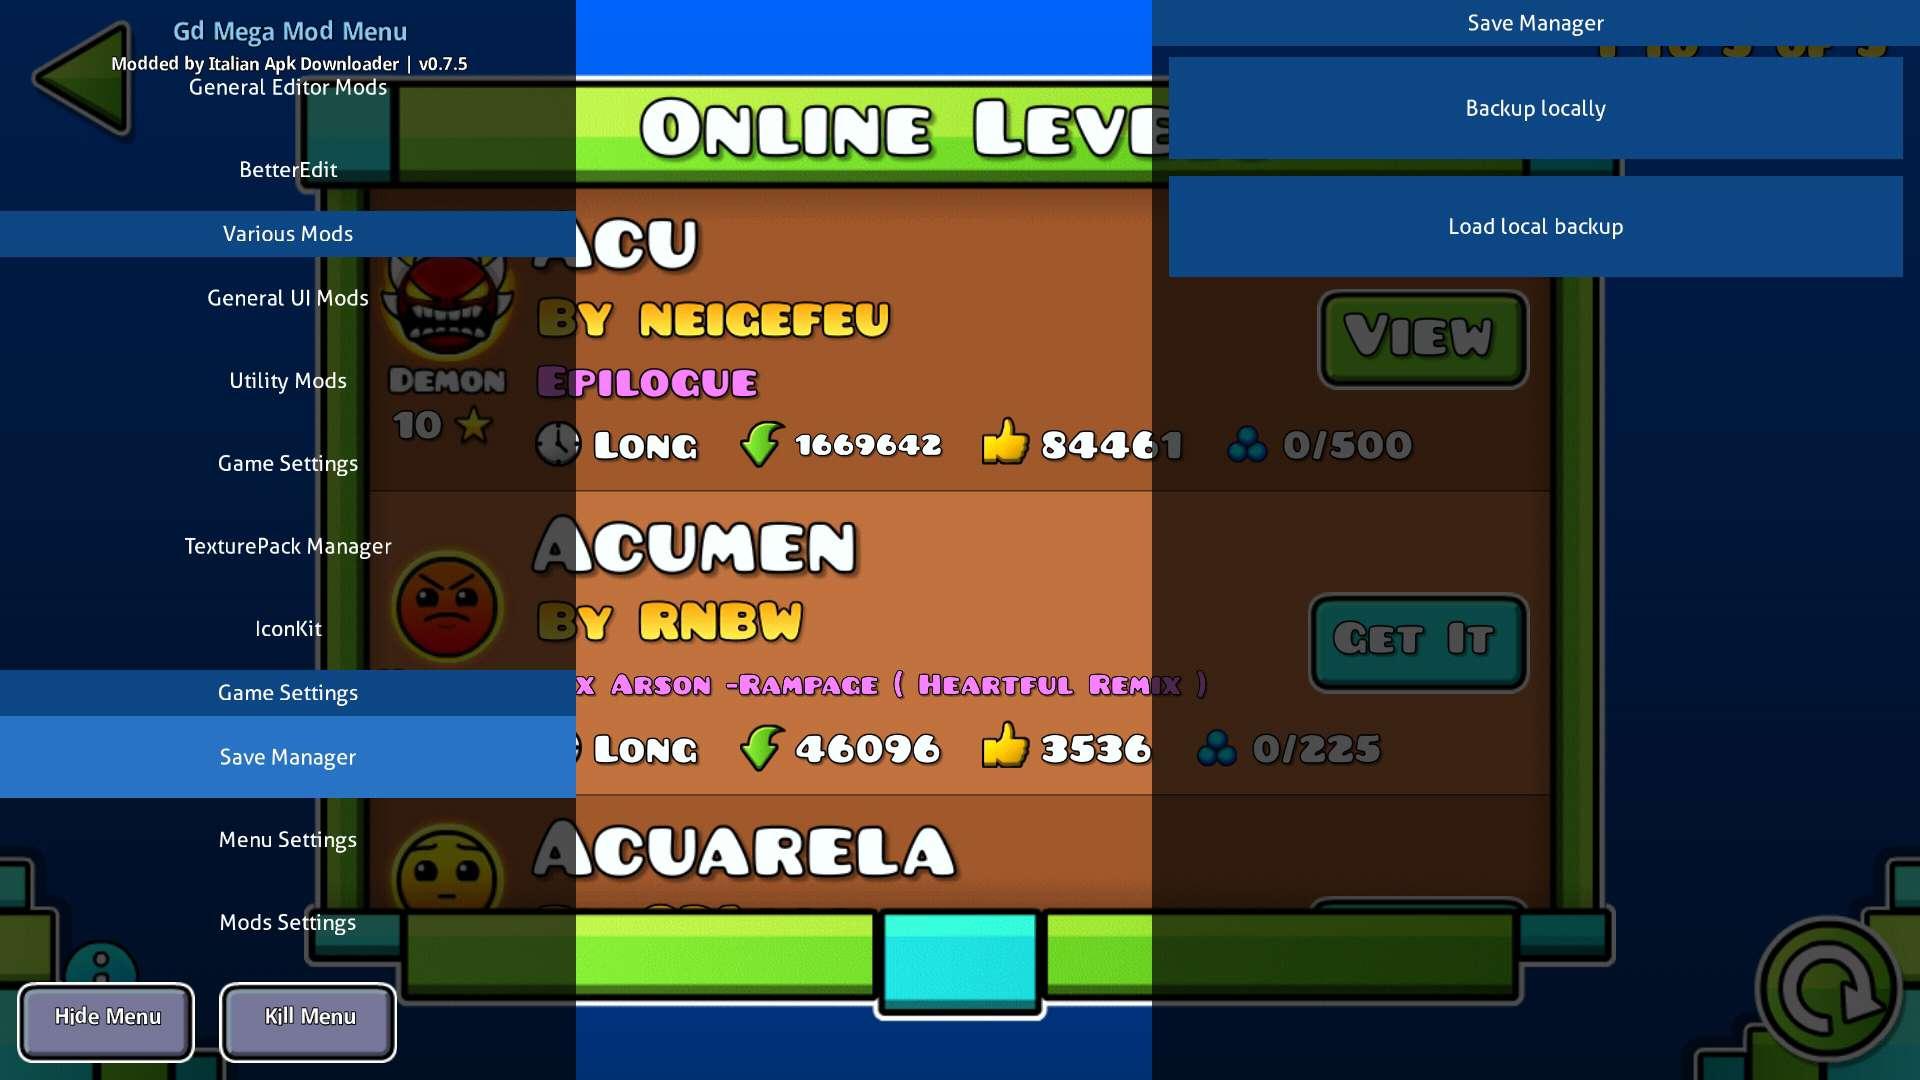 Geometry Dash - How to transfer save file from Windows PC to Android? - Paste the save file to the folder and load - 4EAE8EC